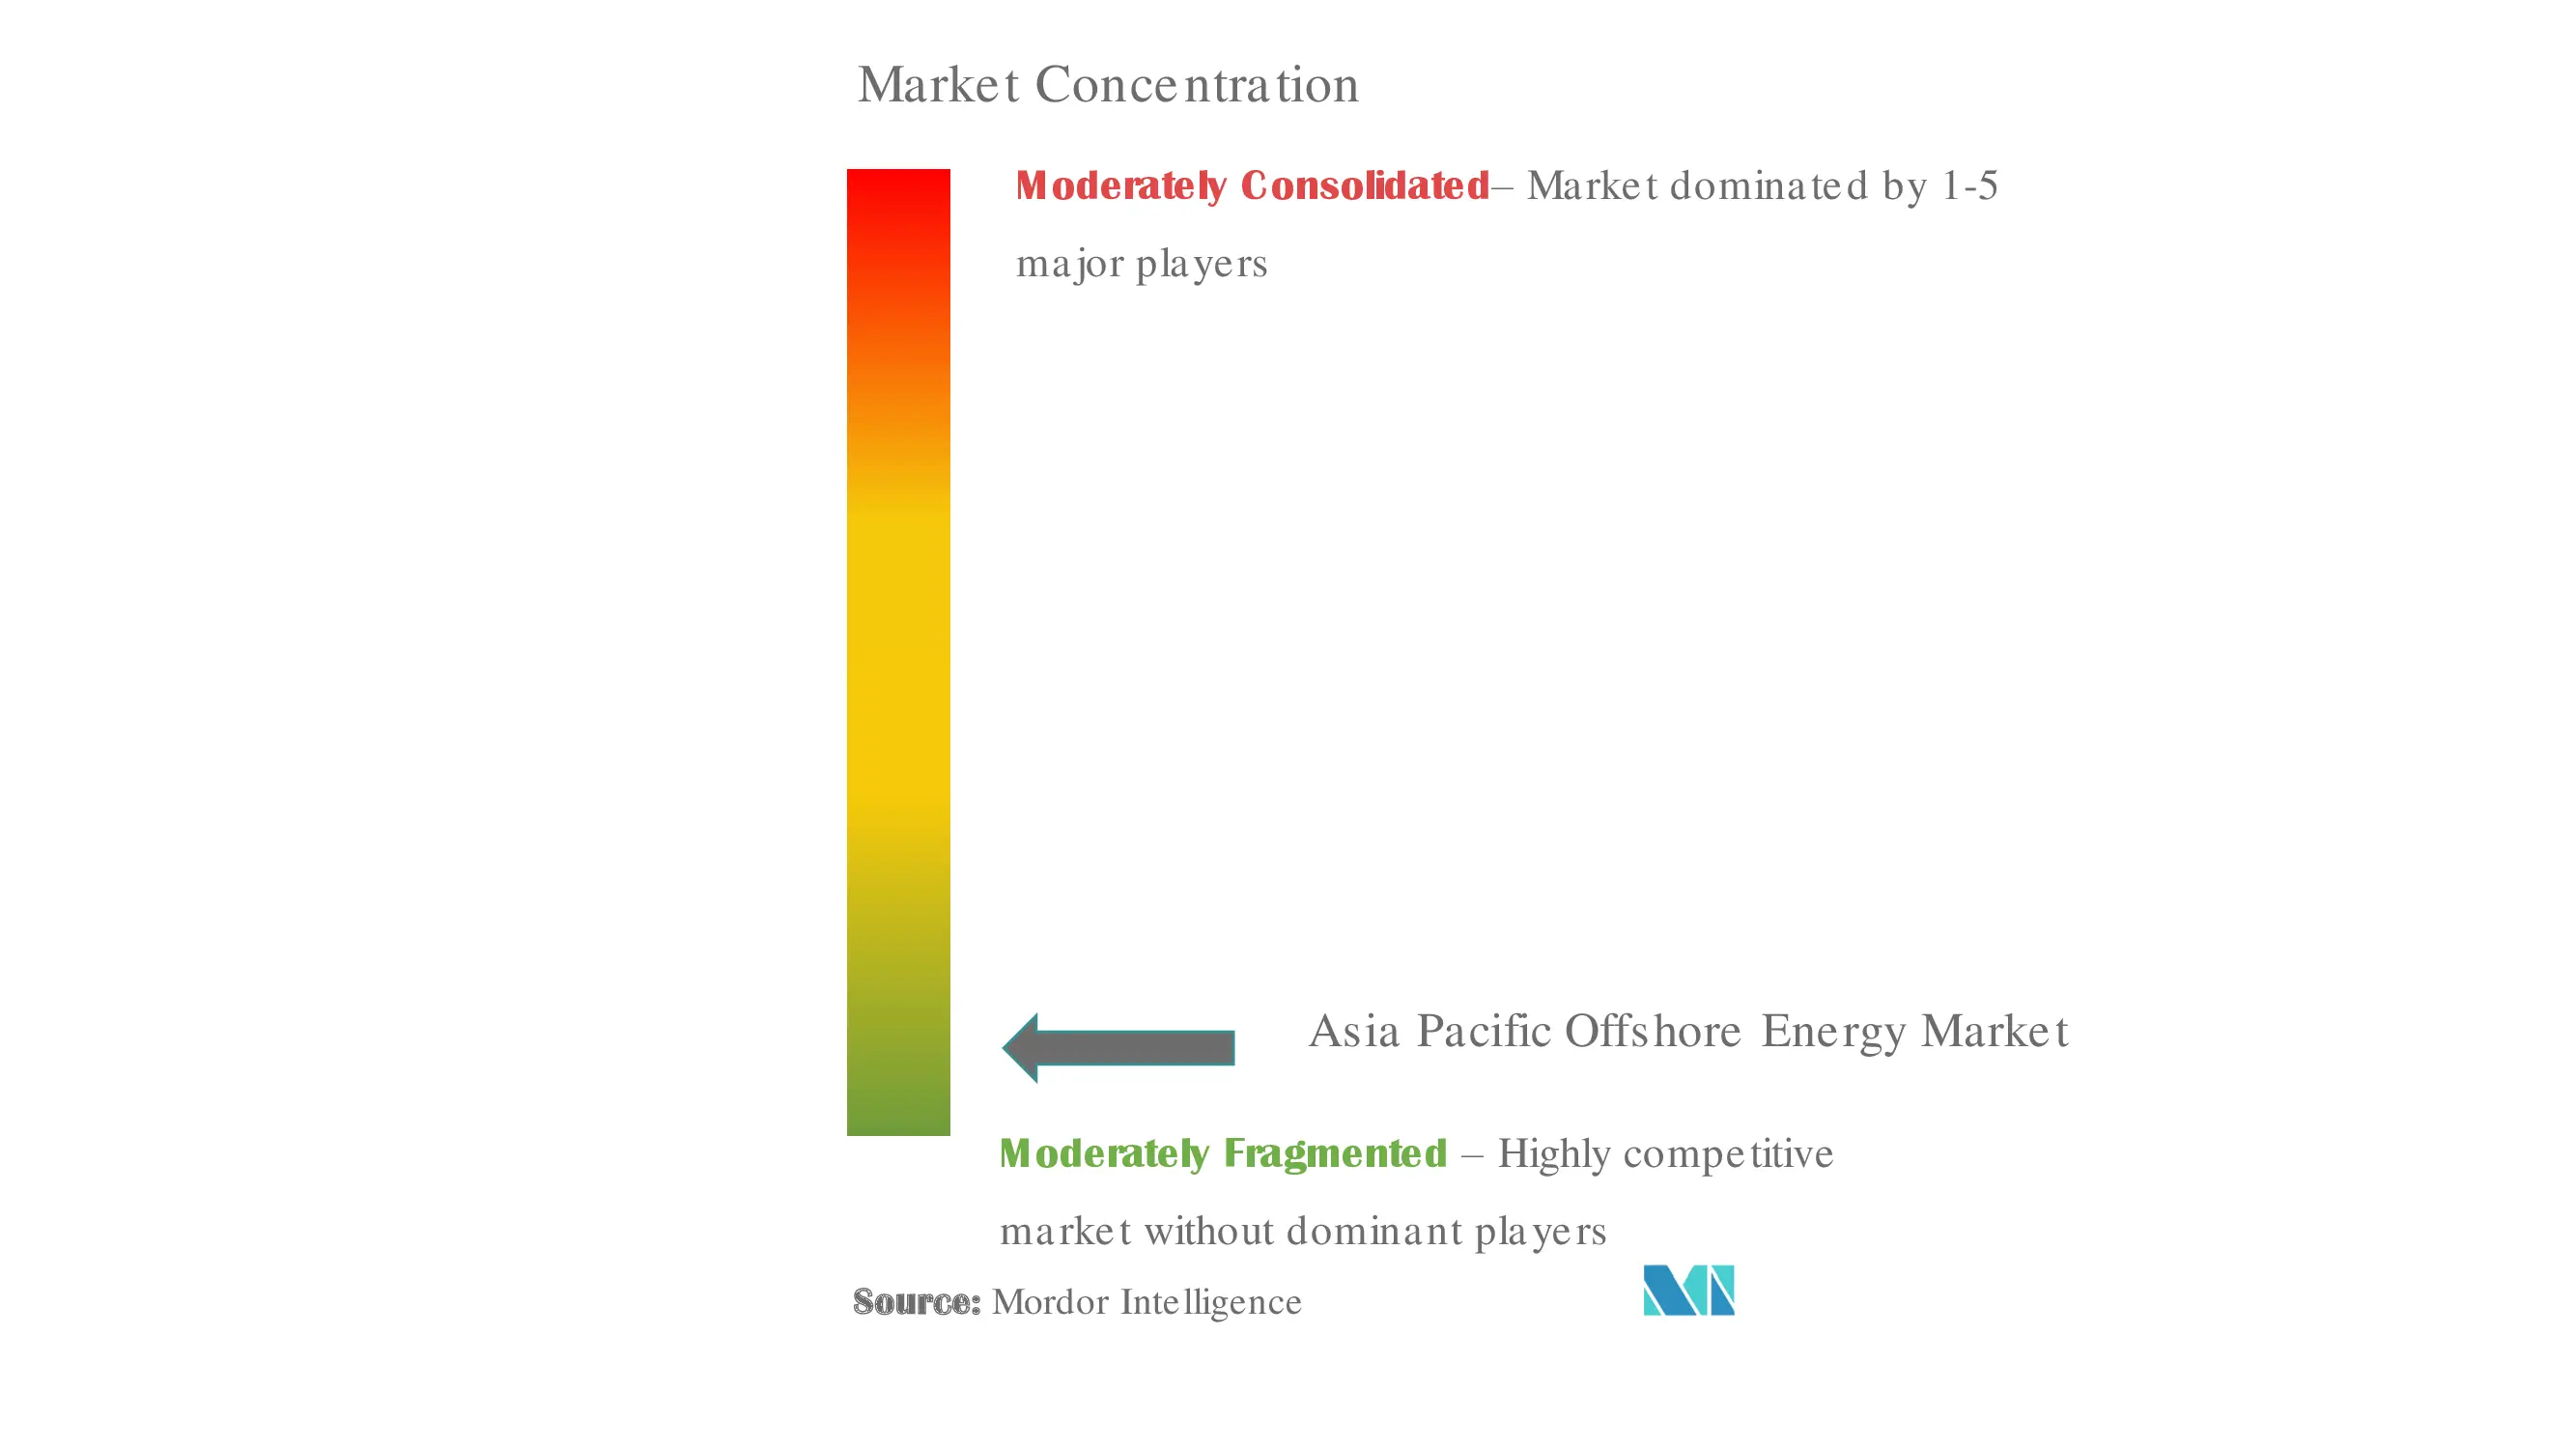 Asia-Pacific Offshore Energy Market Concentration